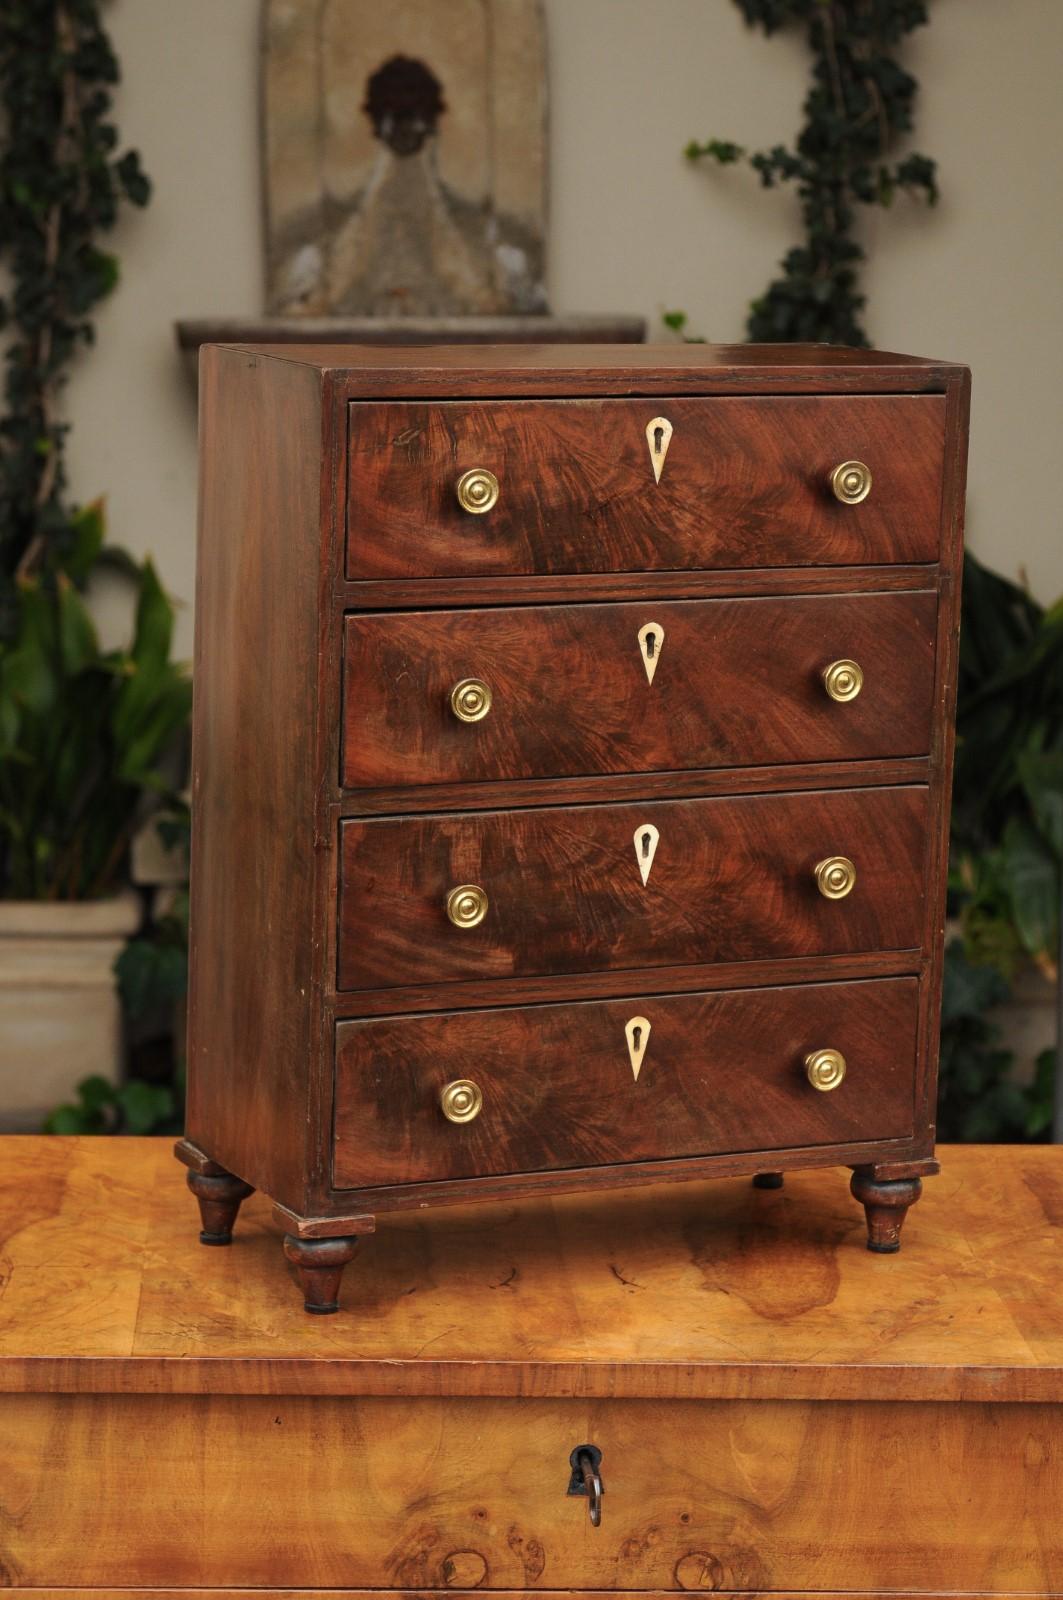 19th Century English Mahogany Mini Chest with Four Drawers and Toupie Feet, circa 1850